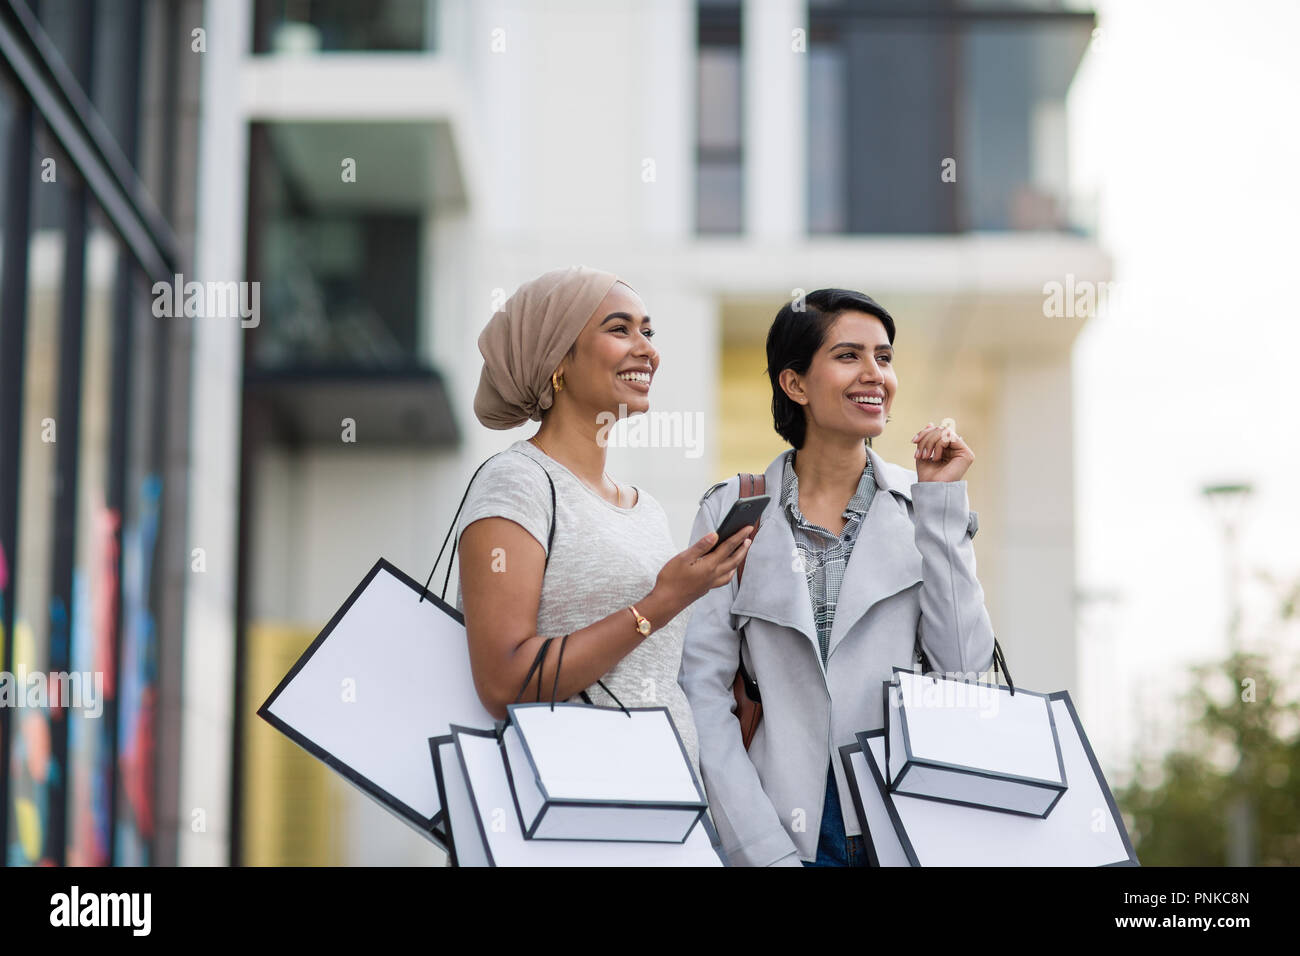 Muslim friends using a smartphone on a shopping trip Stock Photo